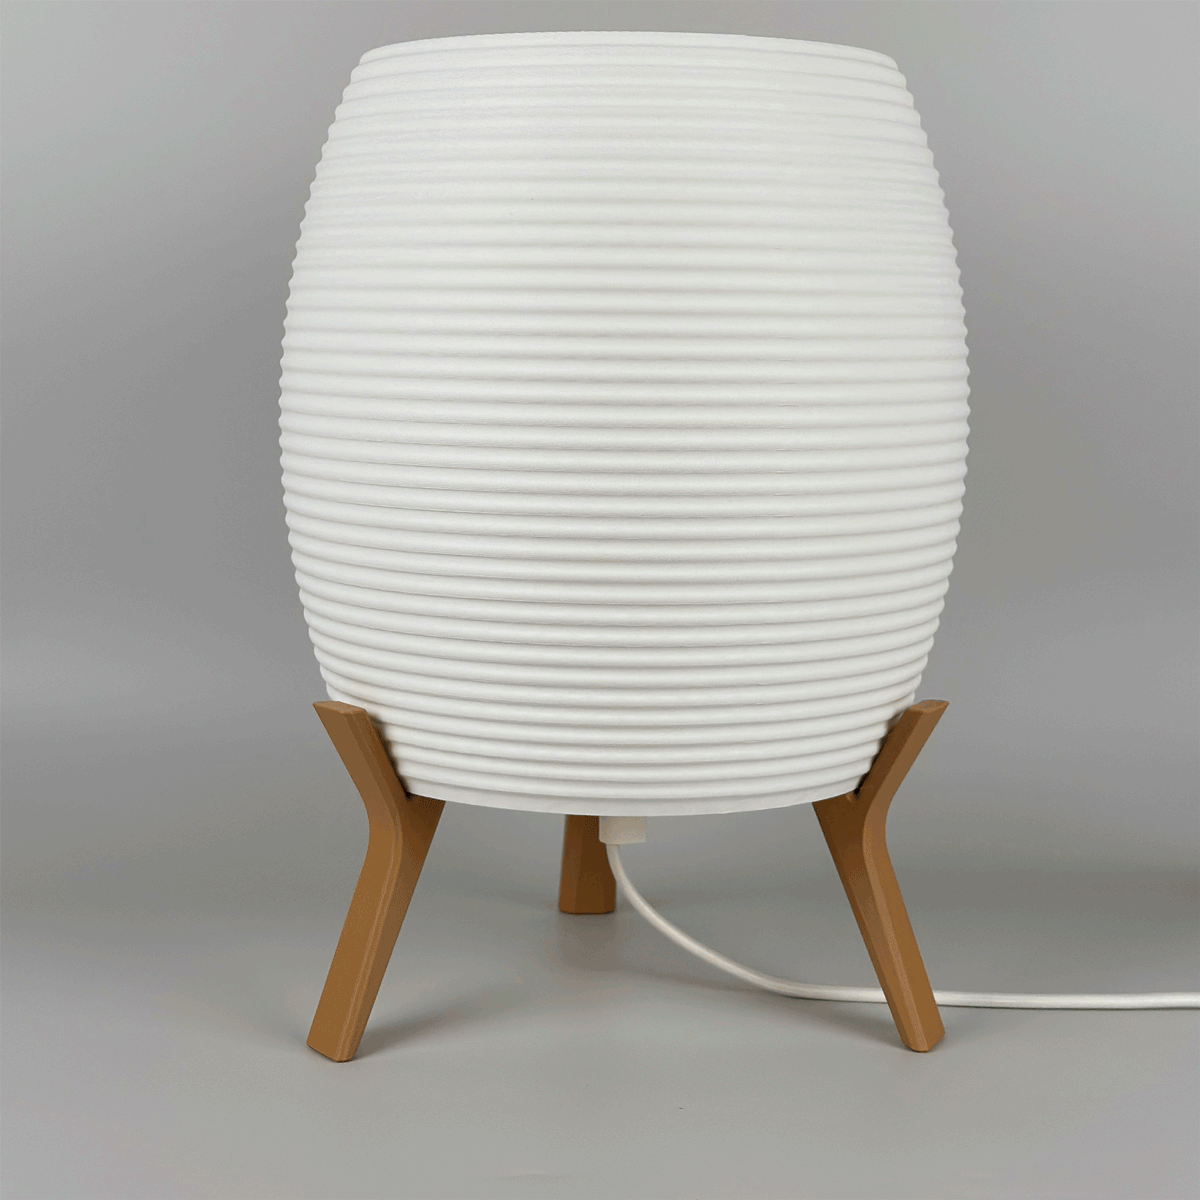 MinimalElegance Curve Table Lamp - Minimalist Bedside lamp in cotton white shade and wood brown base. Lamp is turned on and off.